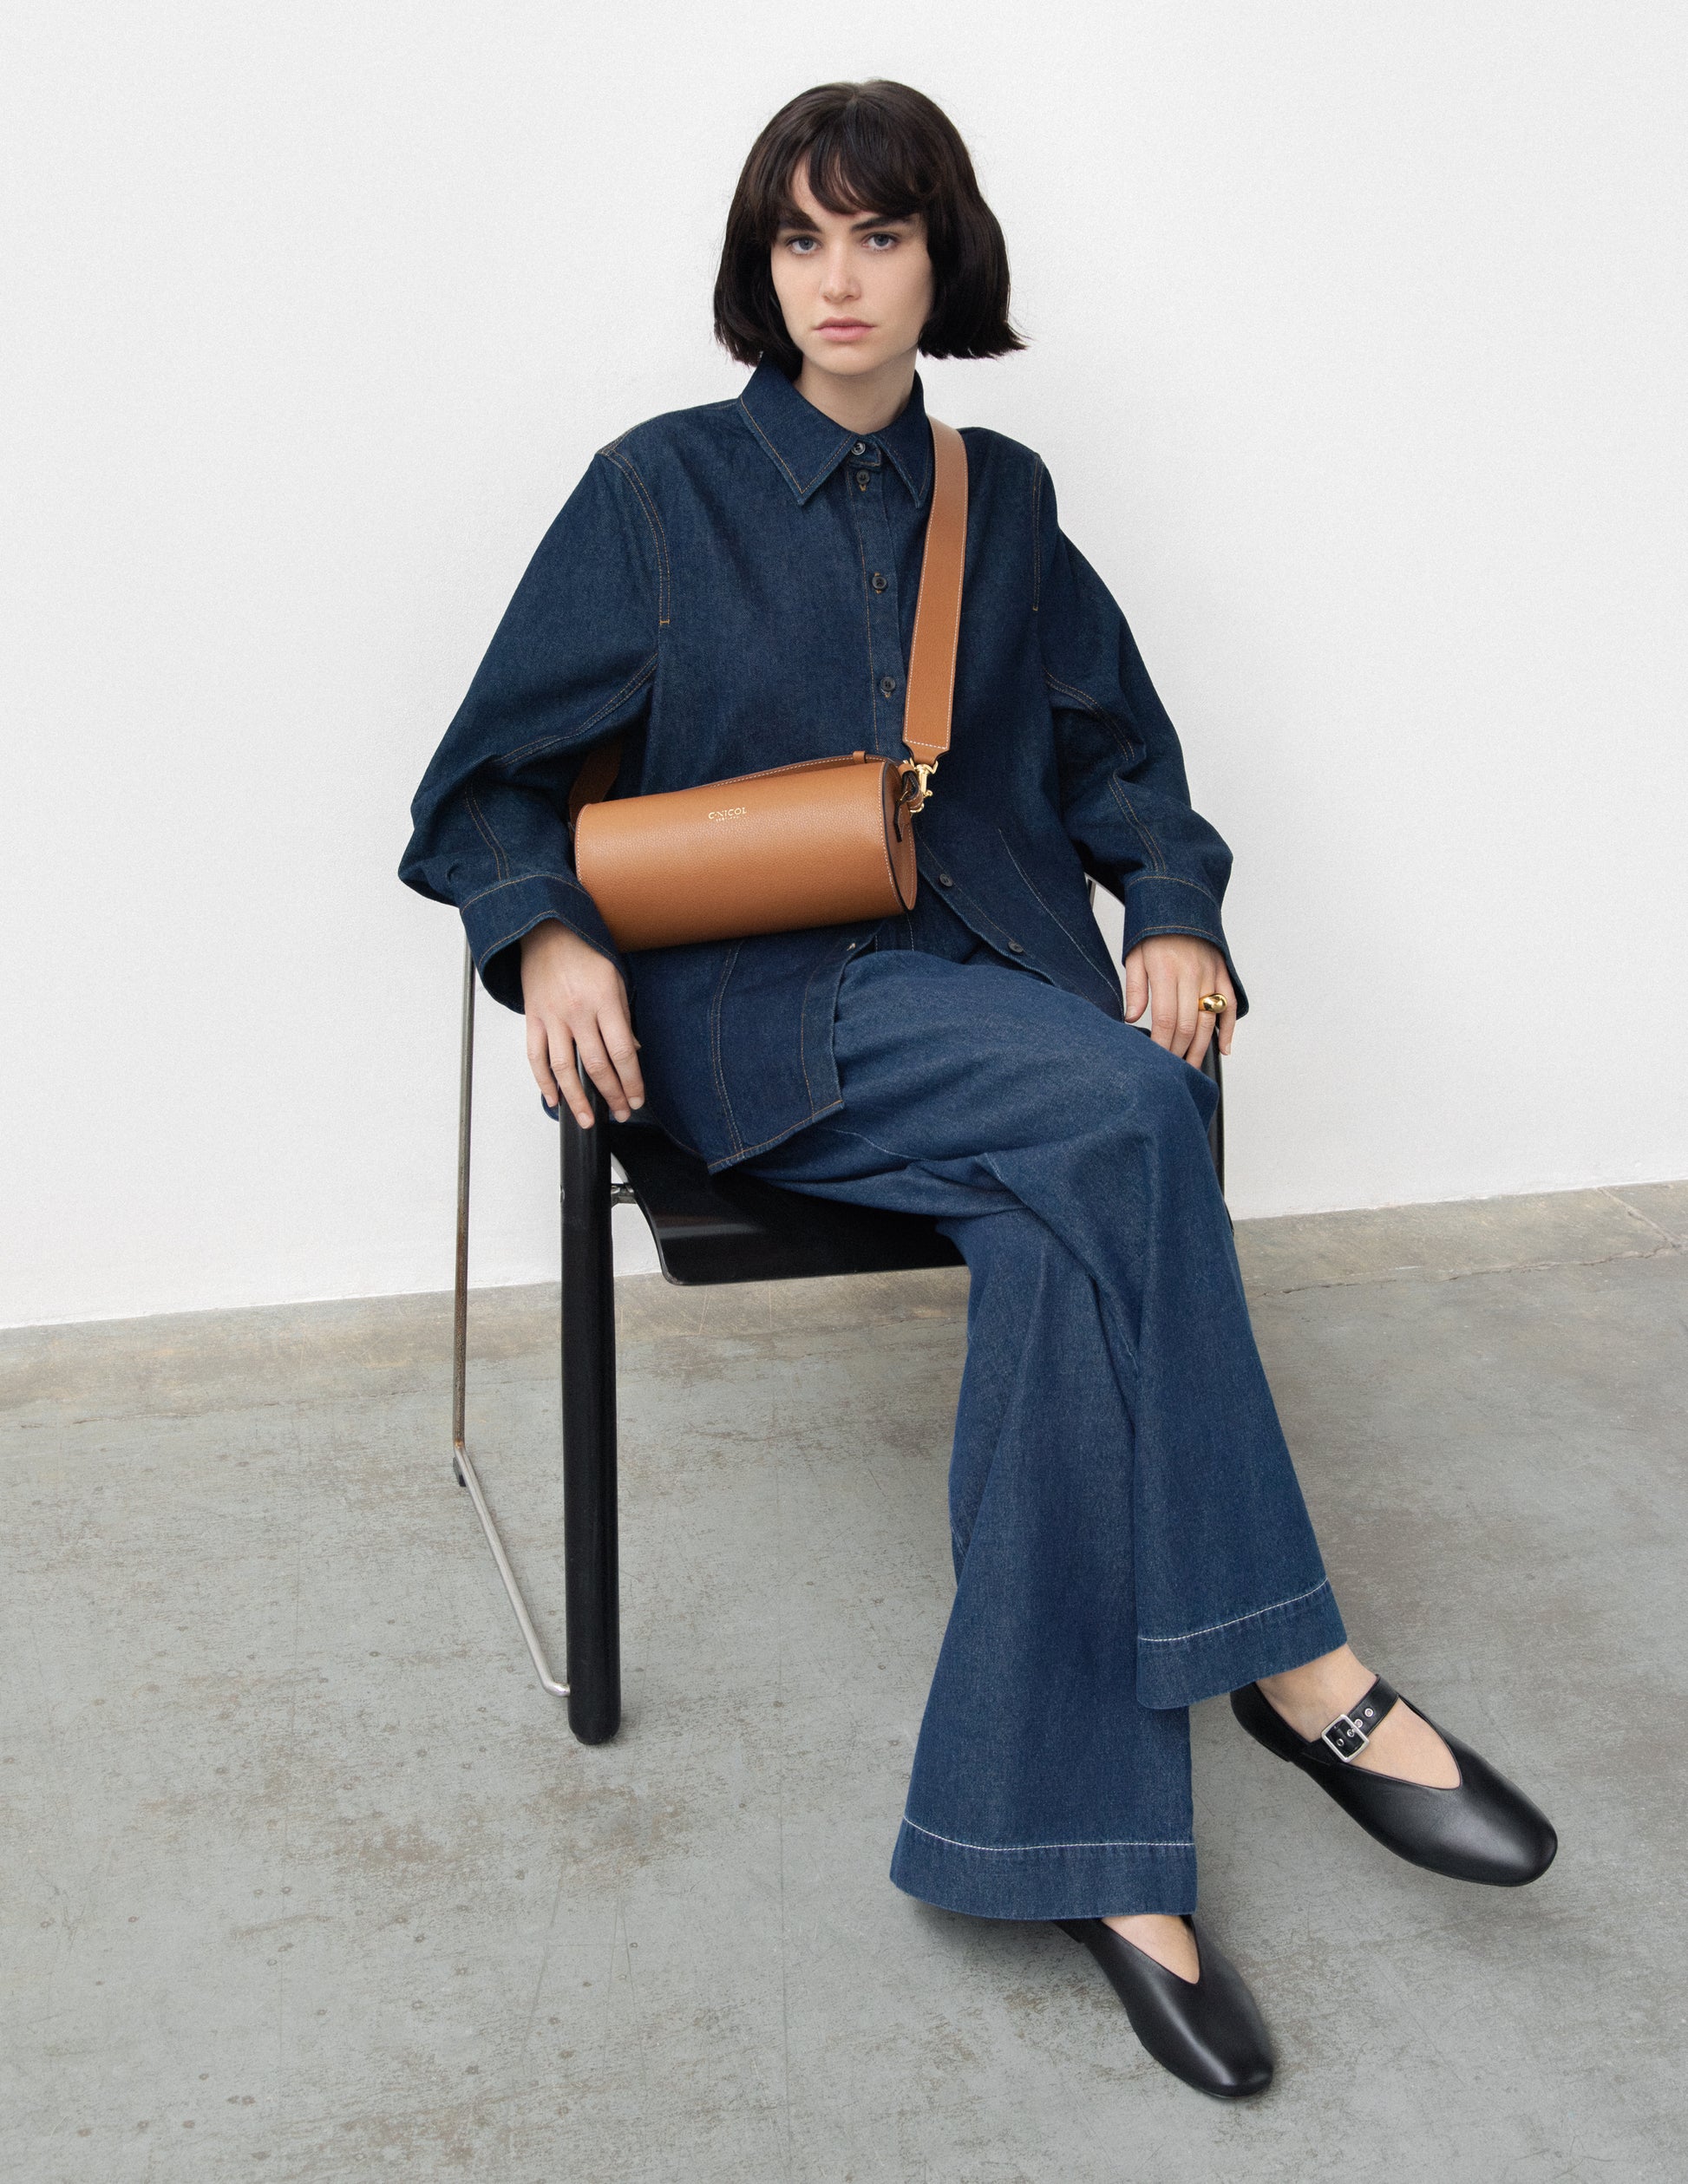 CNicol Brown Leather Bag worn by woman in denim blue shirt and trousers sat on a black and chrome chair